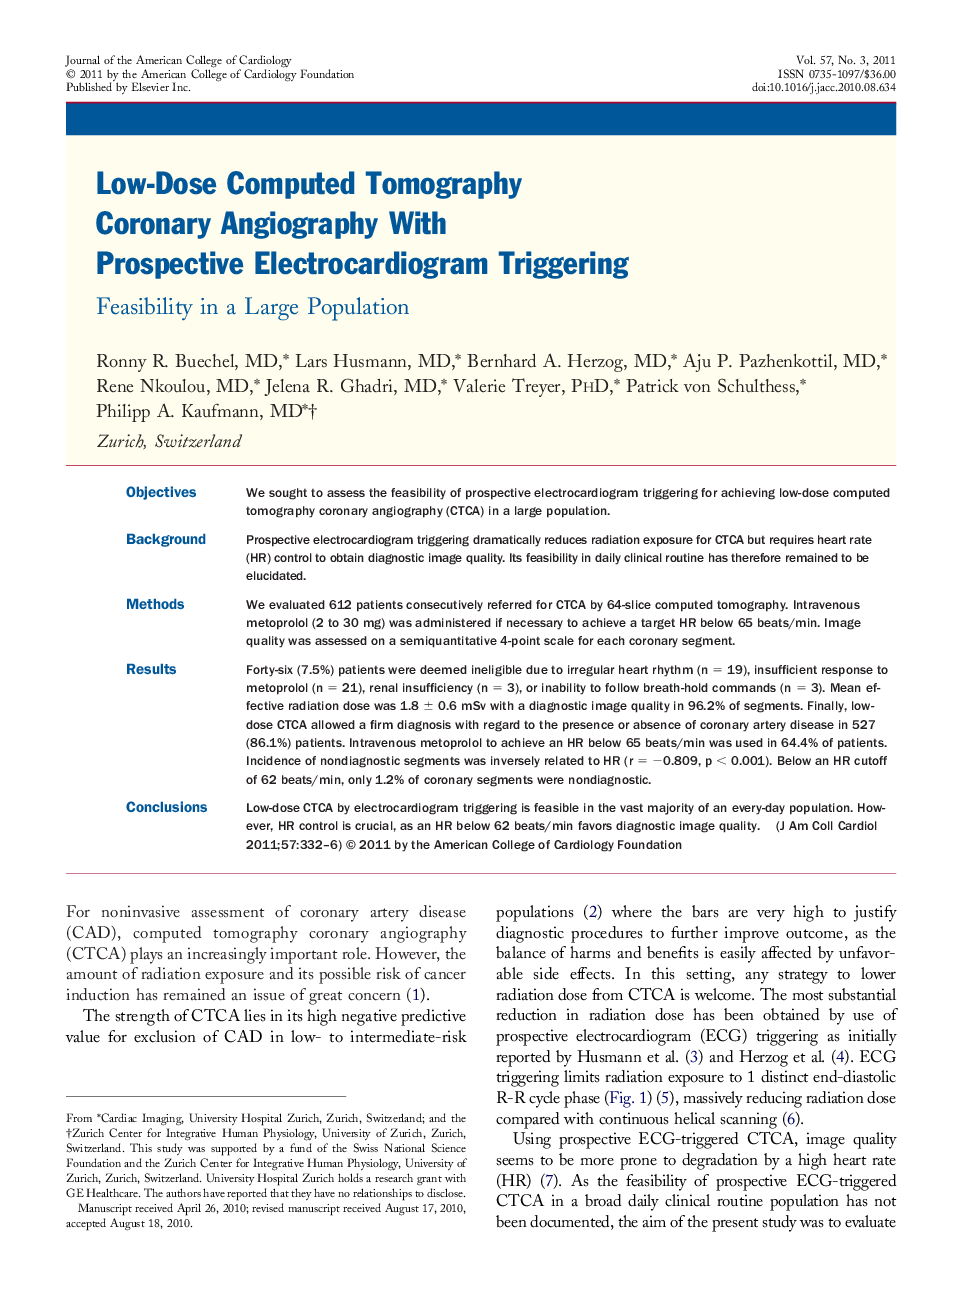 Low-Dose Computed Tomography Coronary Angiography With Prospective Electrocardiogram Triggering : Feasibility in a Large Population